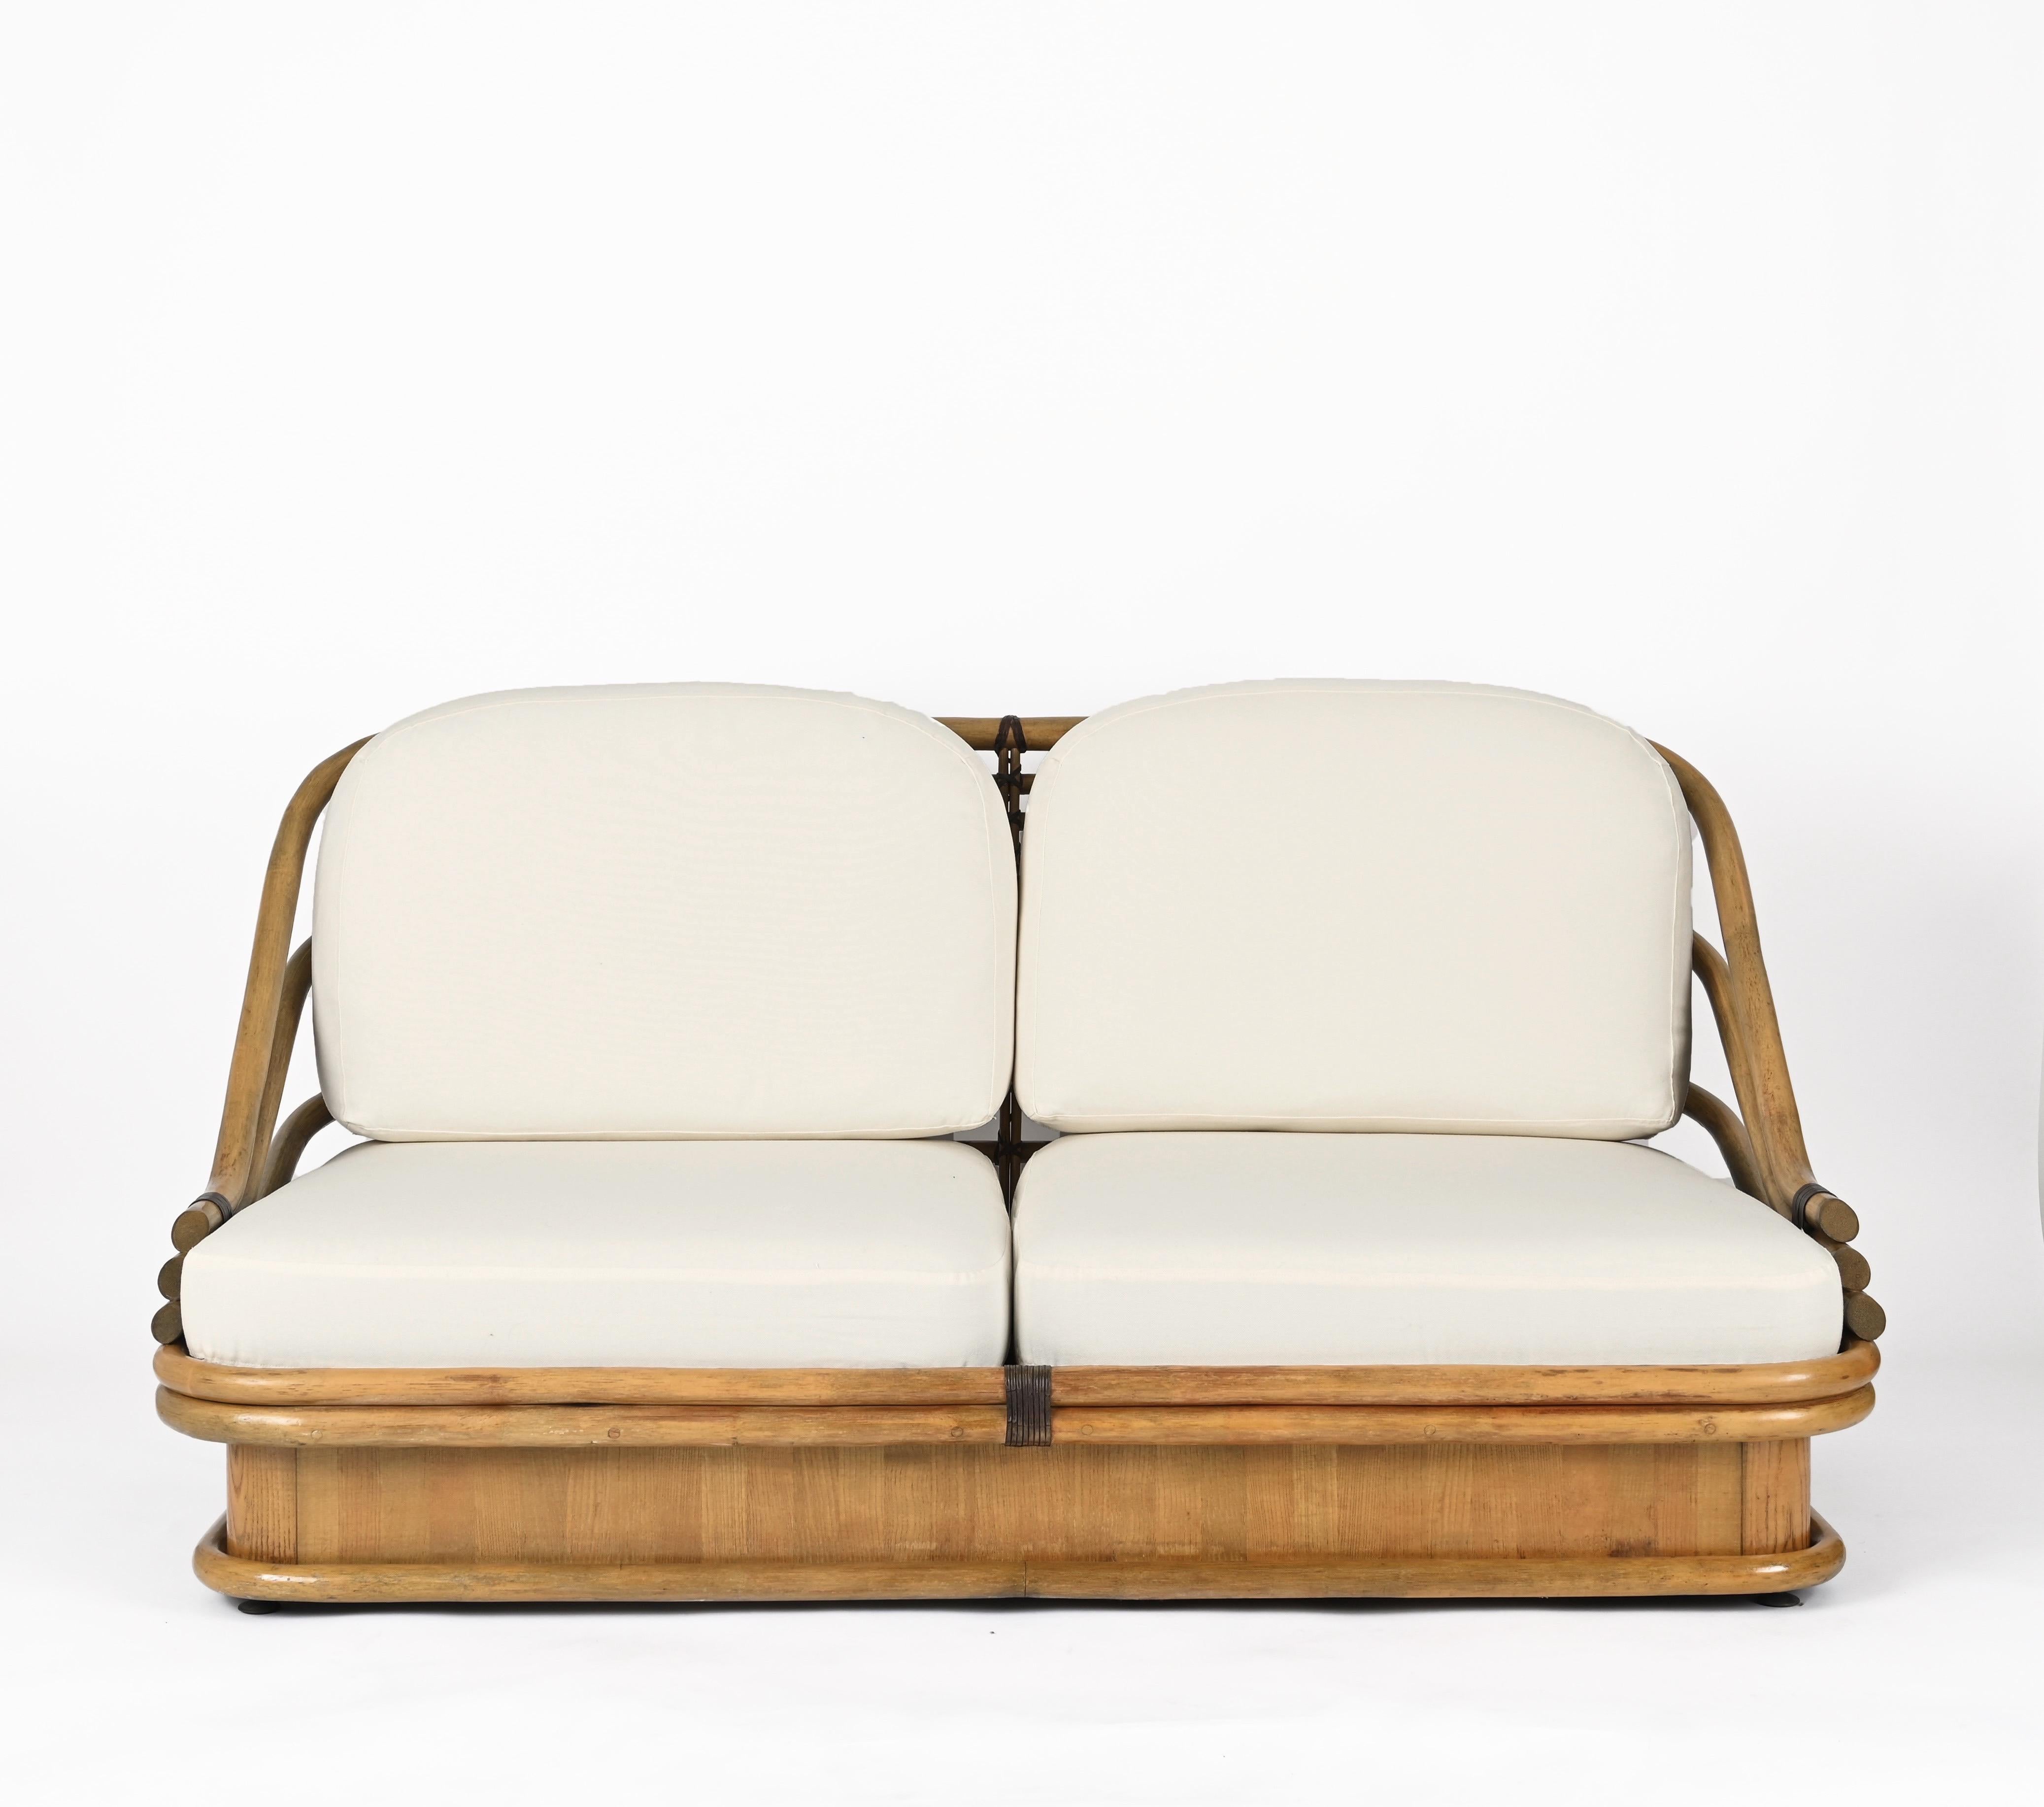 Fantastic Mid-Century organic sofa, fully made in bamboo, leather, and maple wood. This elegant piece was produced in Italy during the 1960s. with chestnut e and leather finishes. 

This sofa is incredible as it is made in a stunning combination of